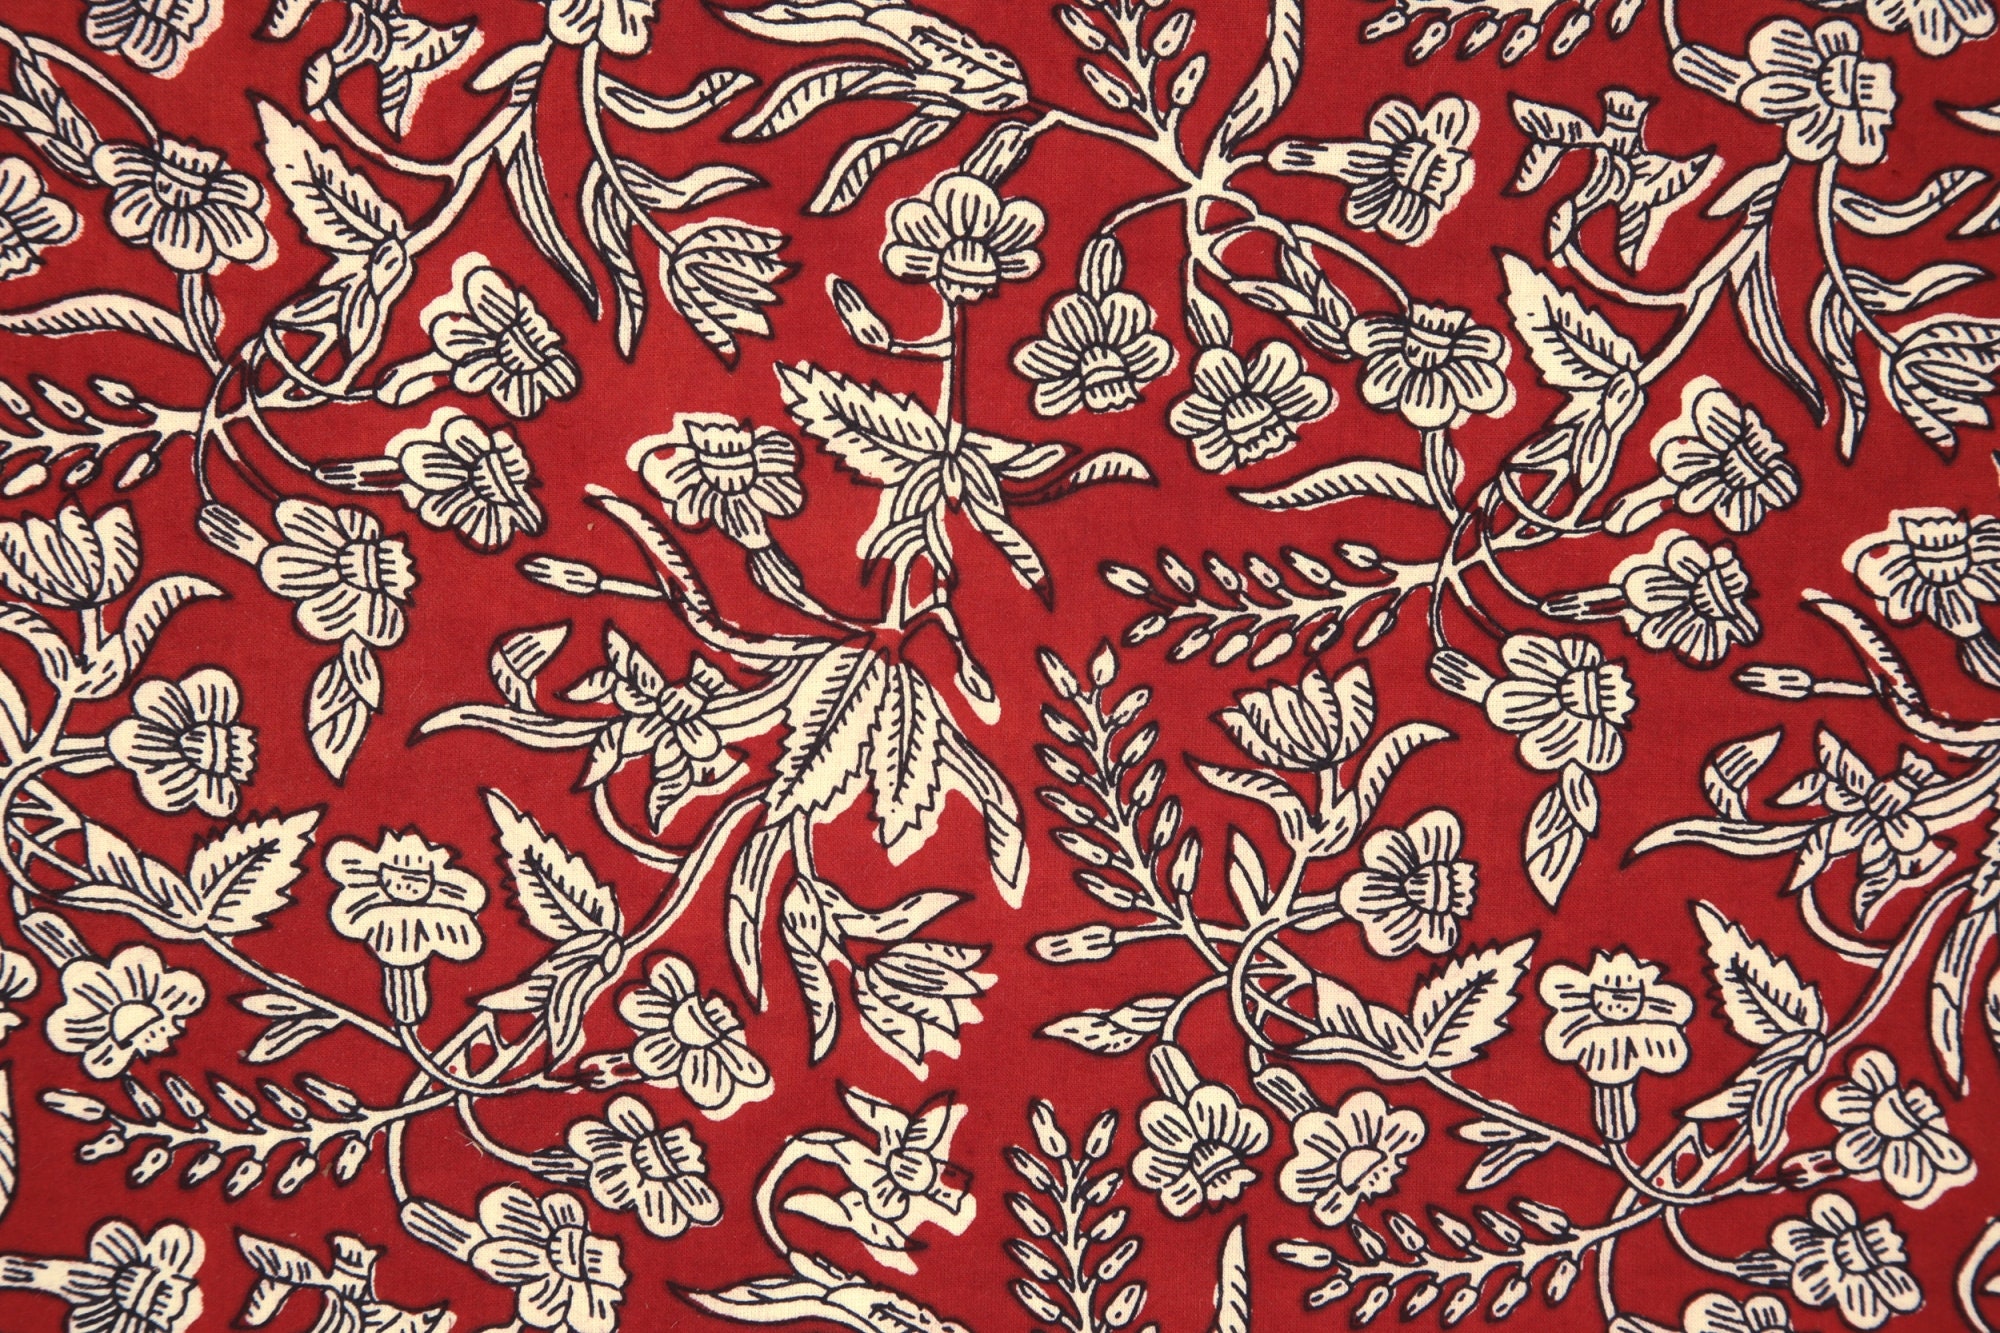 2.5 YD Cotton Hand Block Printed Indian Fabric Red White Floral